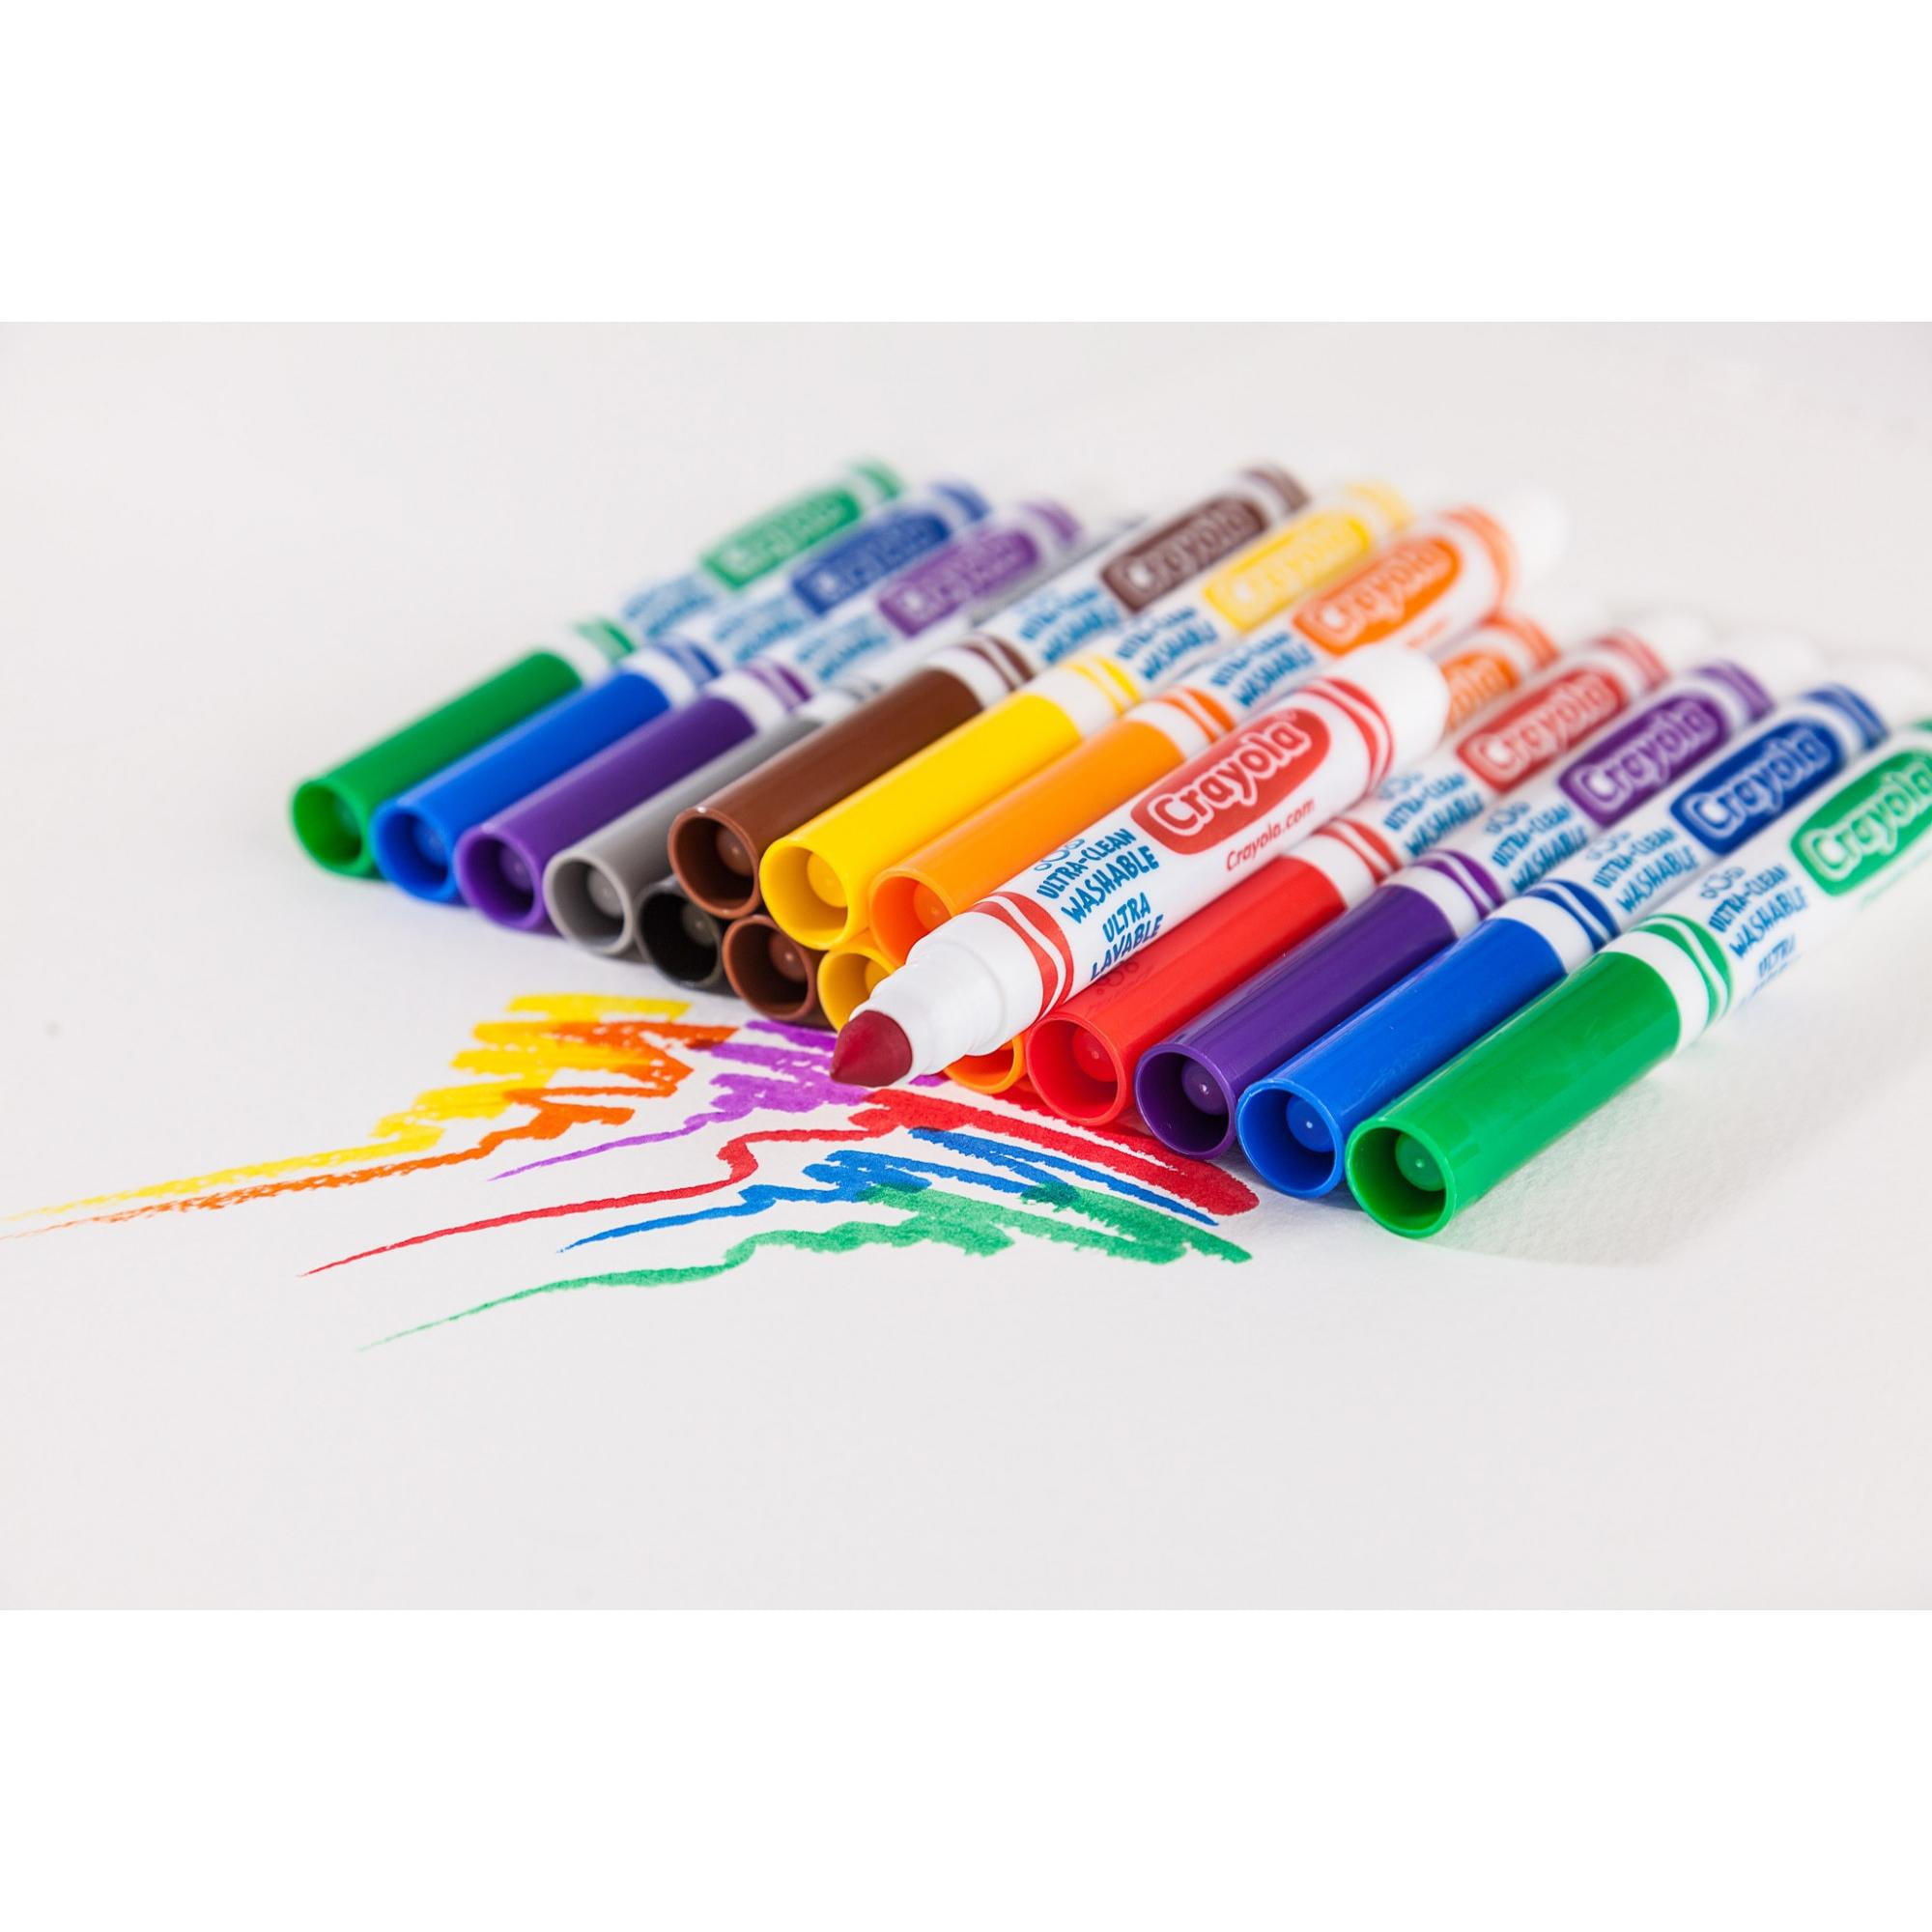 Crayola Ultra-Clean Washable Broad Line Markers, School & Art Supplies, 10  Ct